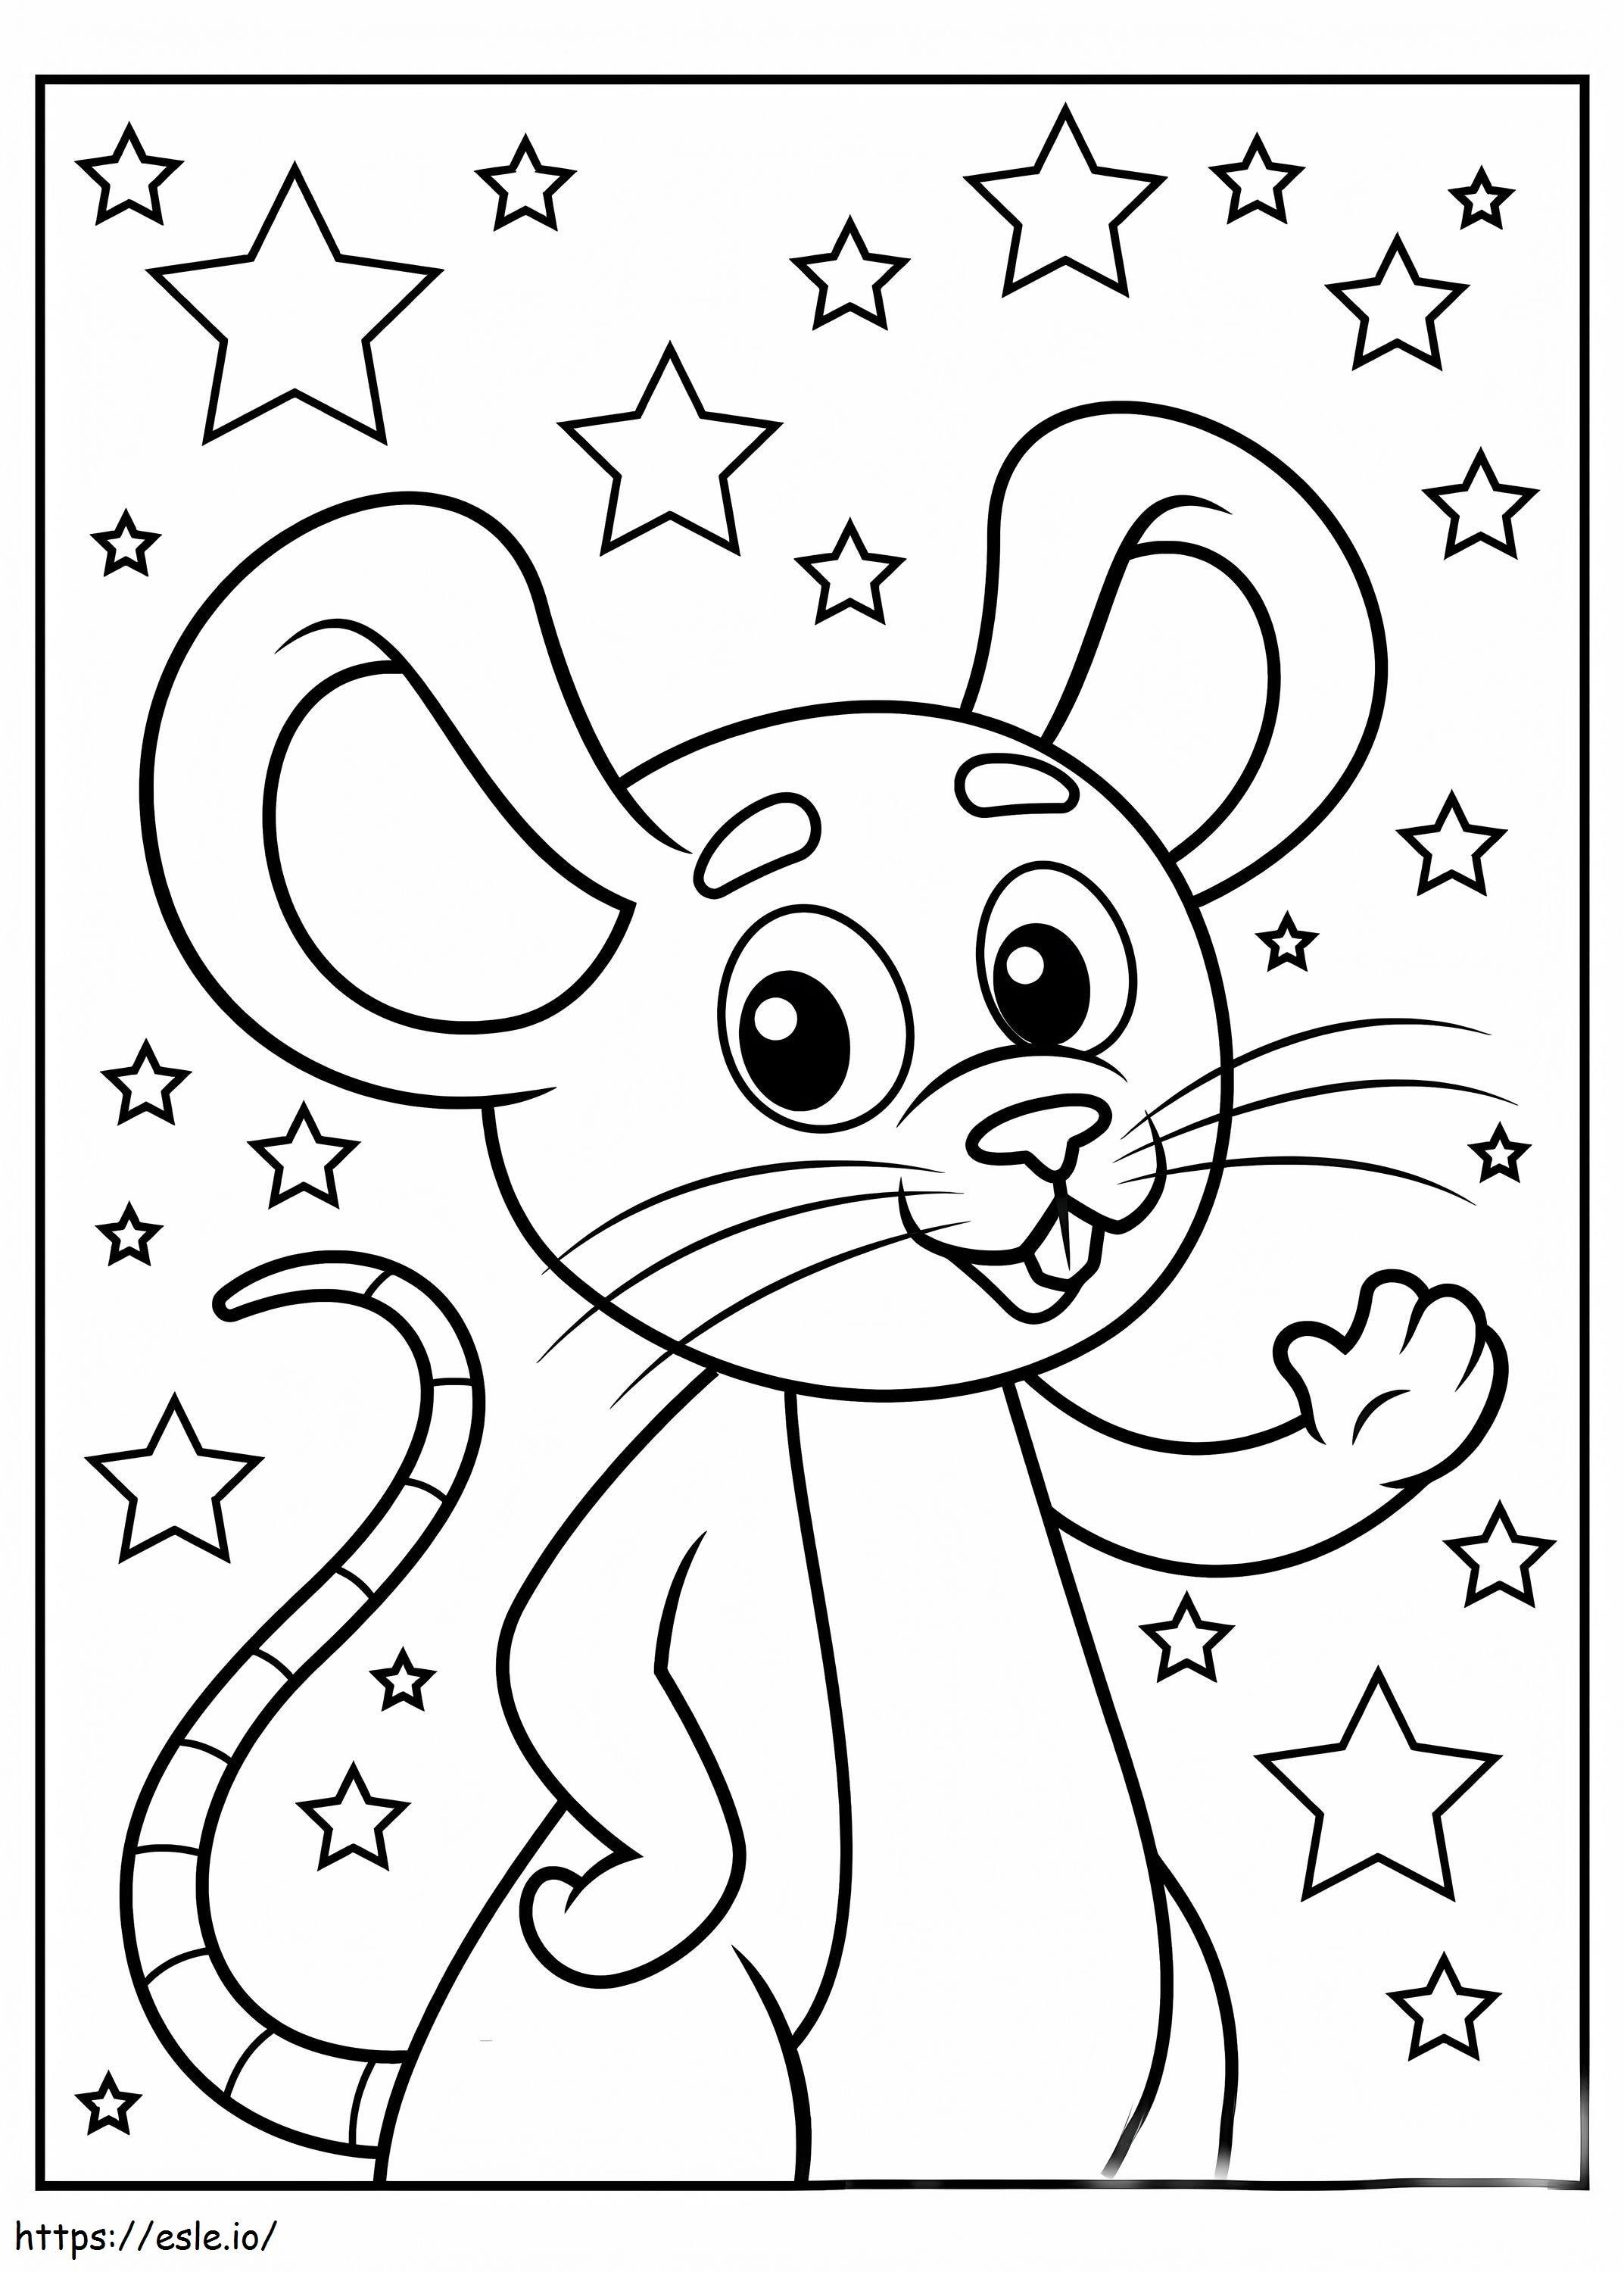 Mouse And Star coloring page